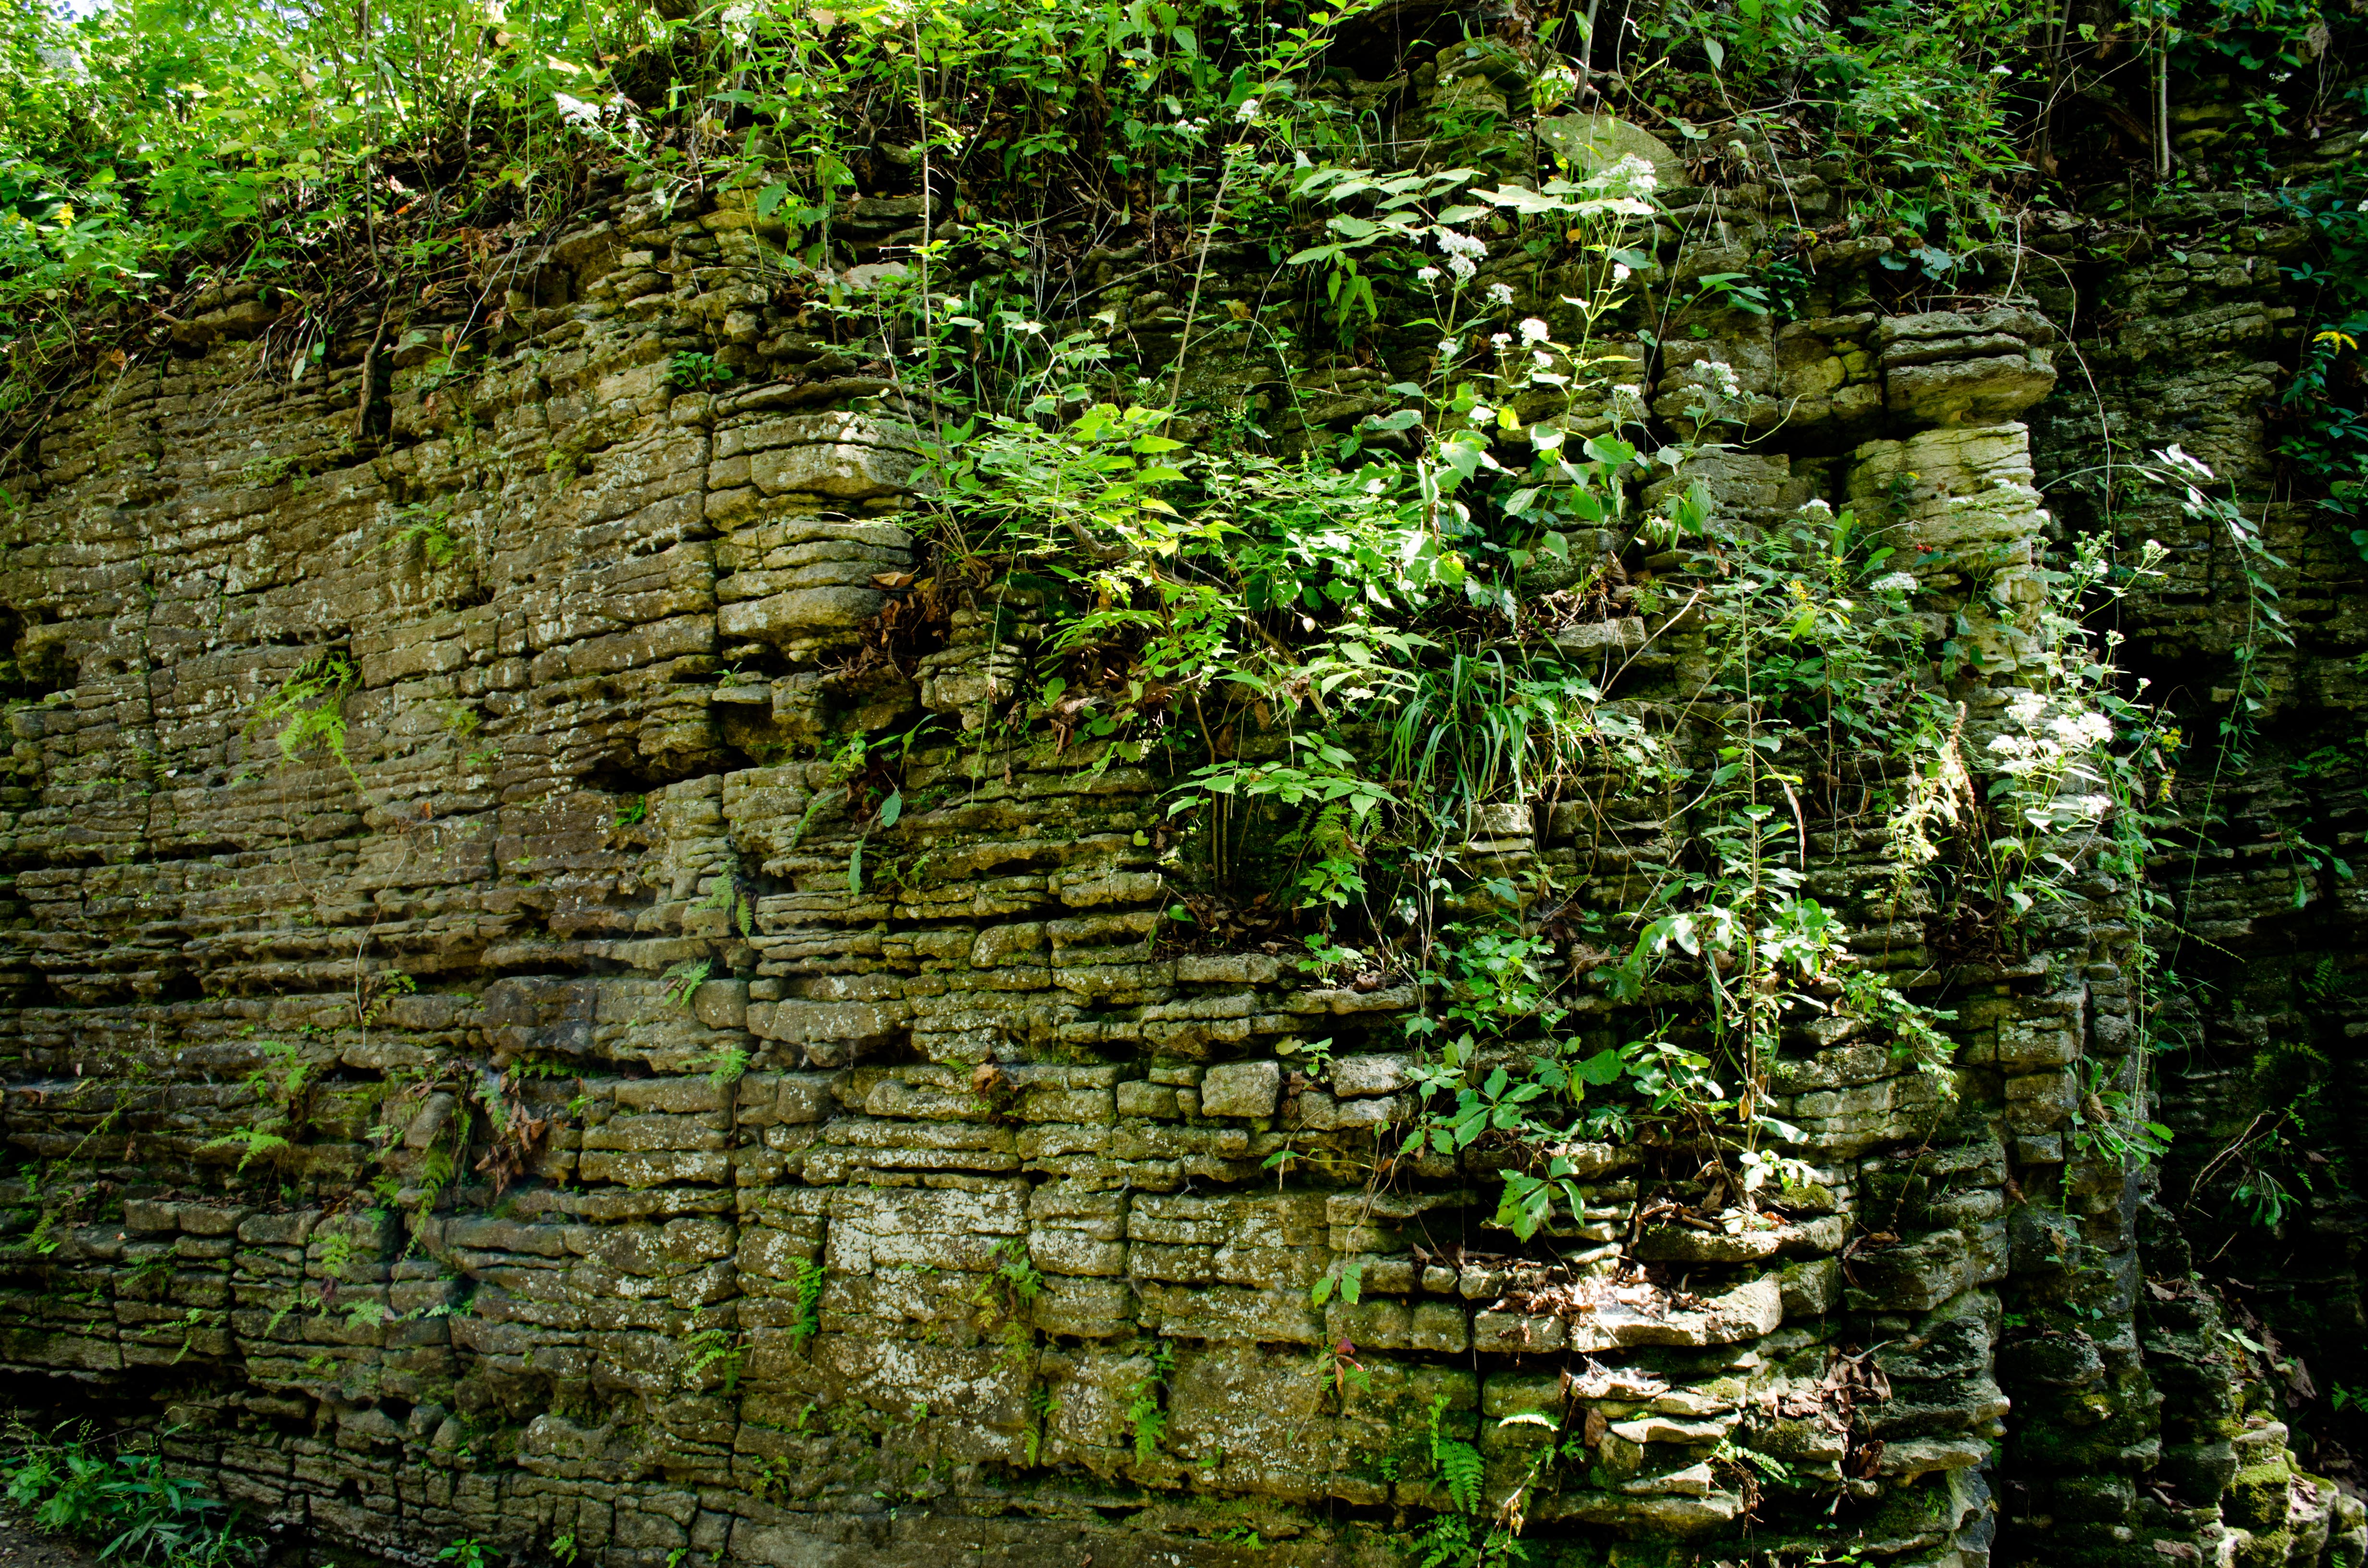 Image of Sagawau Canyon at the Cook County Forest Preserve taken in summer of 2014 by Eric Ma. Rock wall shows thin bedded Silurian dolomite typical of inter reef deposits.